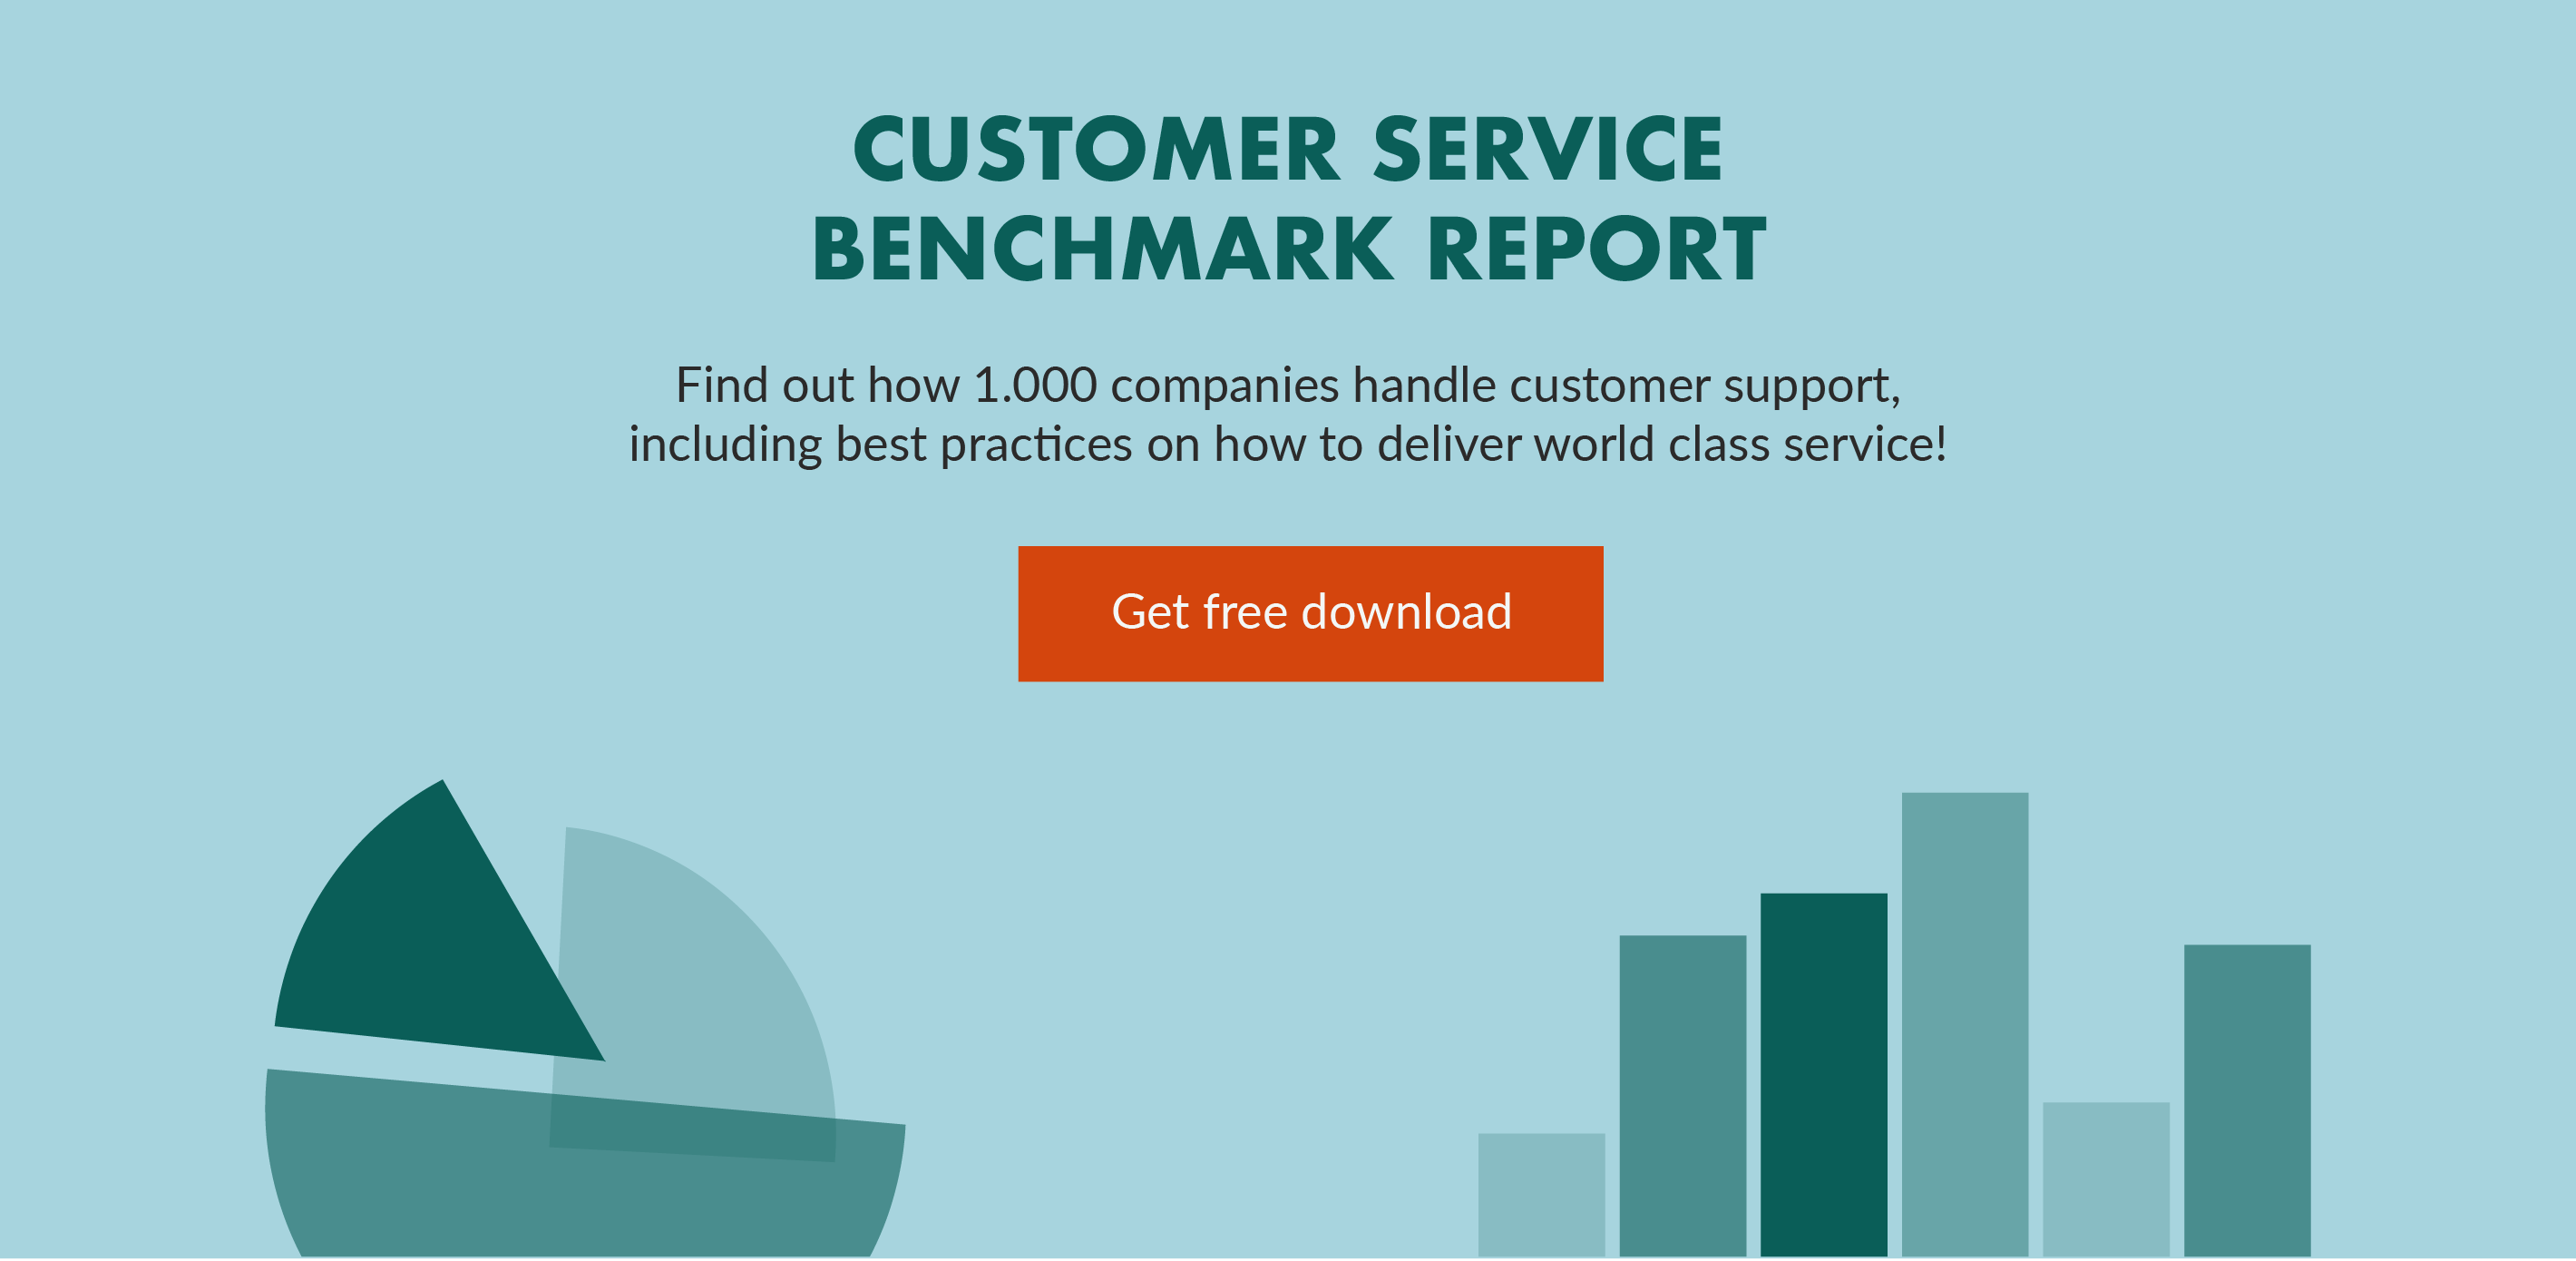 access the benchmark report